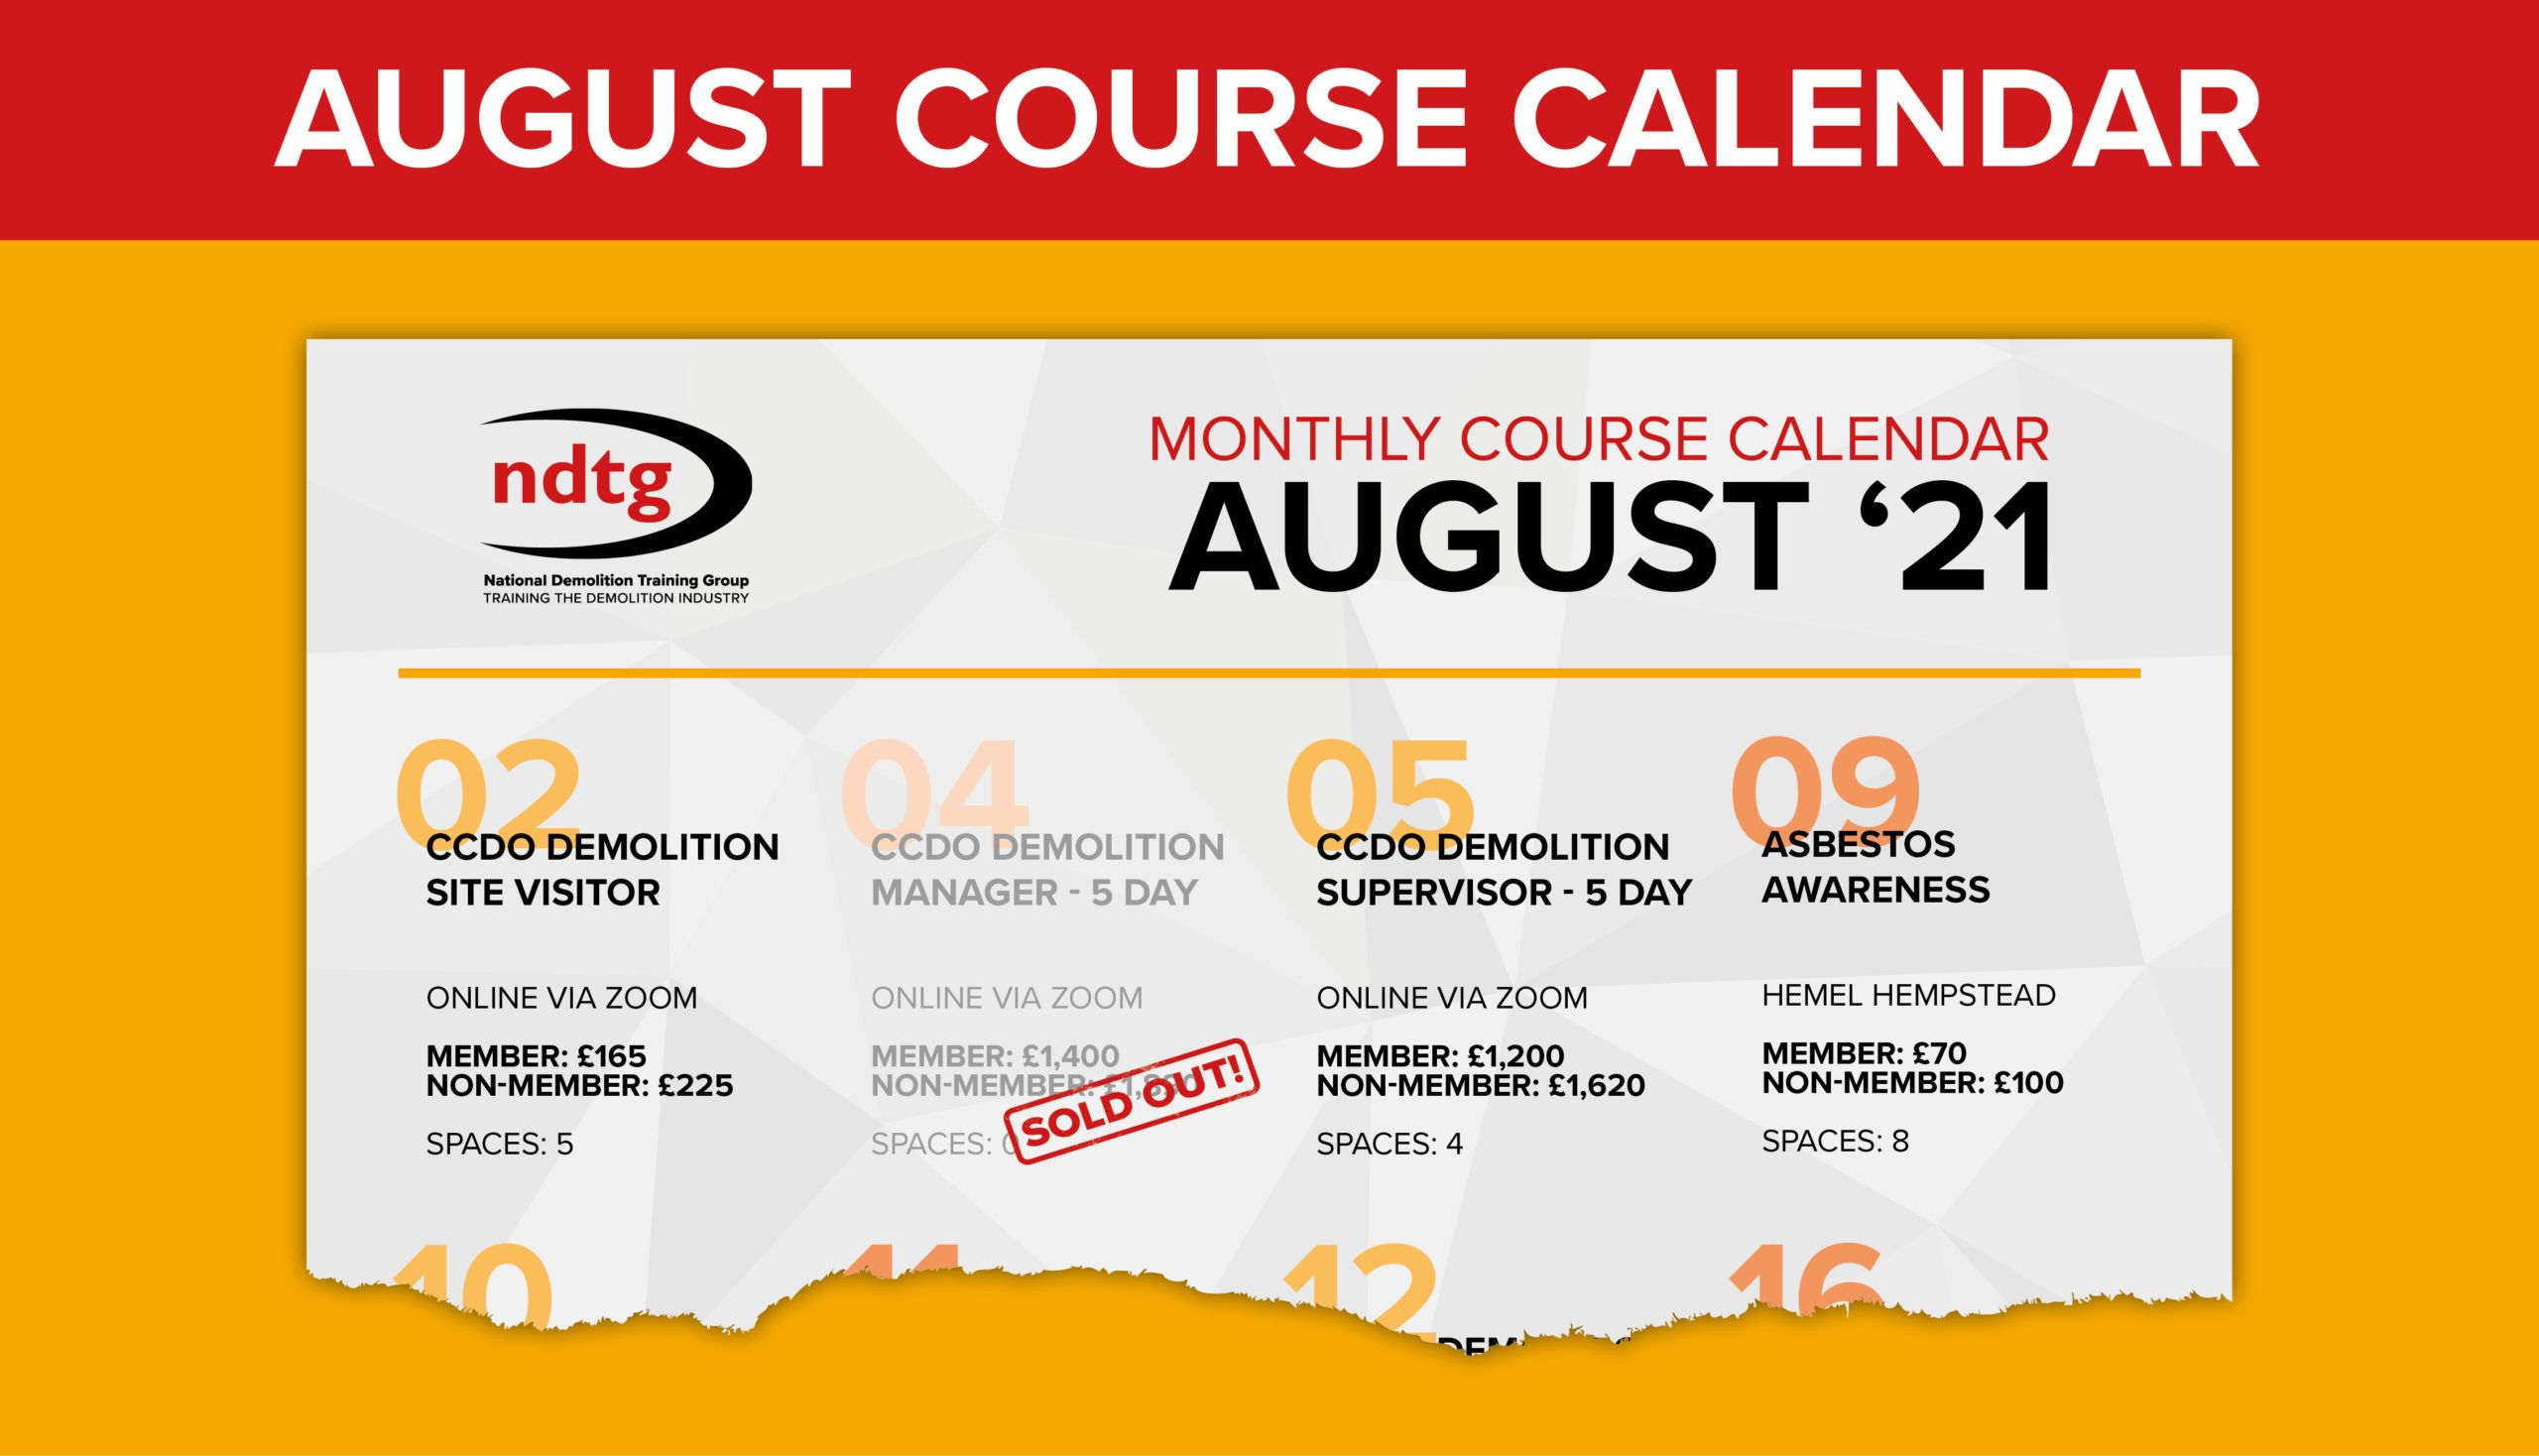 August Course Calendar Out Now!